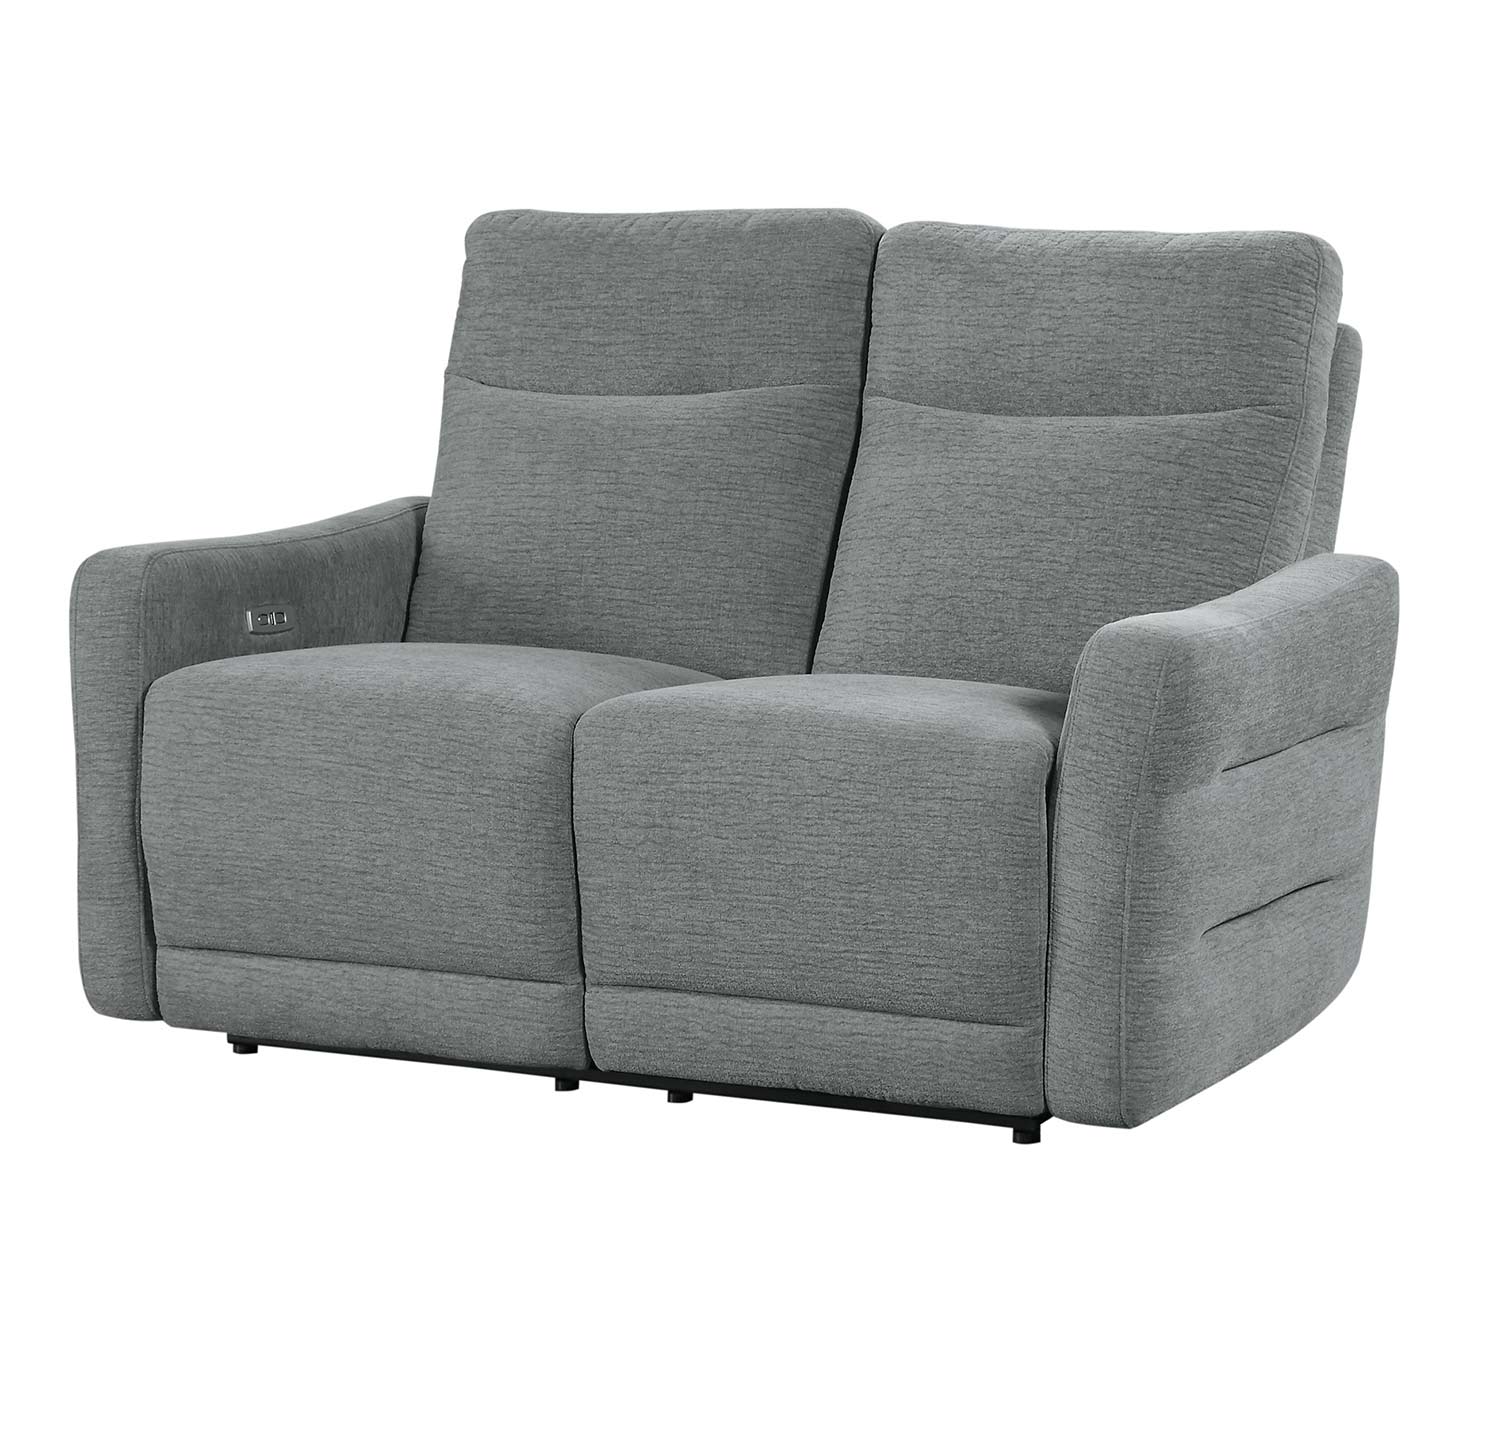 Homelegance Edition Power Double Lay Flat Reclining Love Seat with Power Headrests - Dove